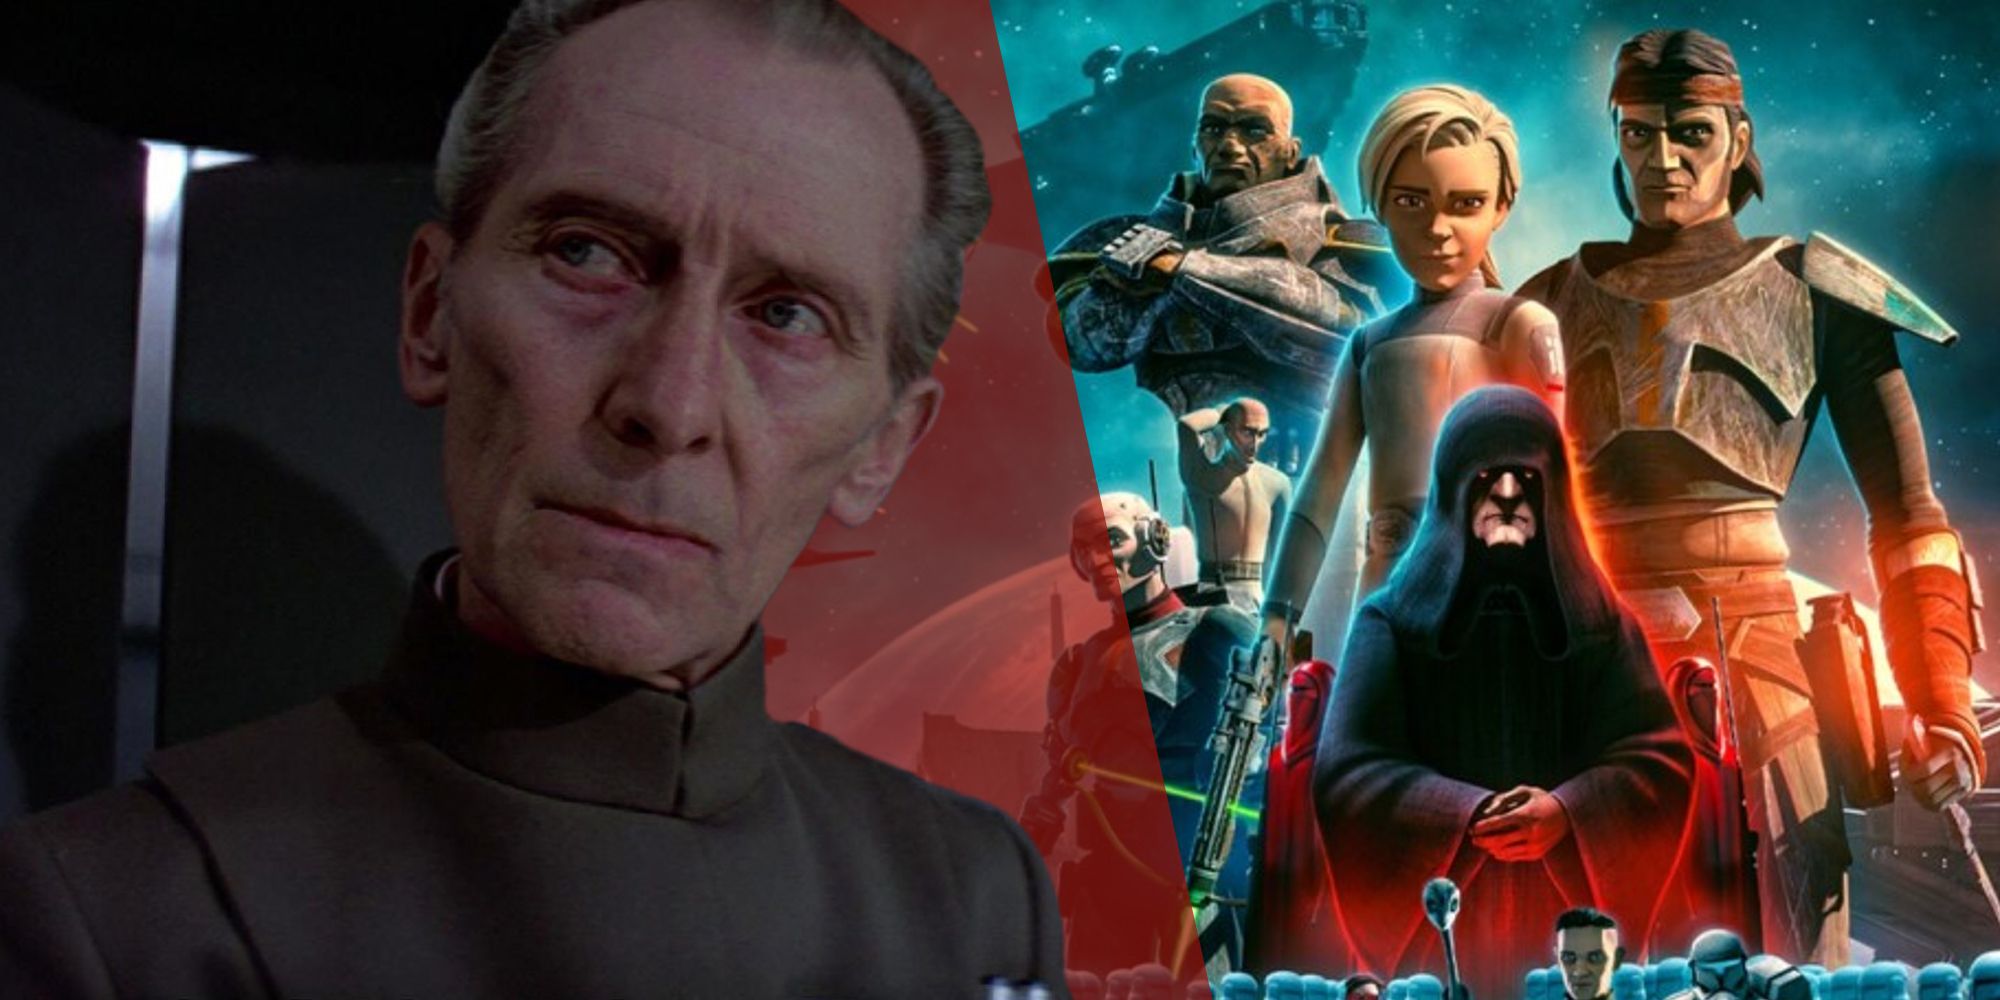 Peter Cushing as Tarkin from A New Hope (1977) next to the poster for Star Wars: The Bad Batch season 3 (2024)